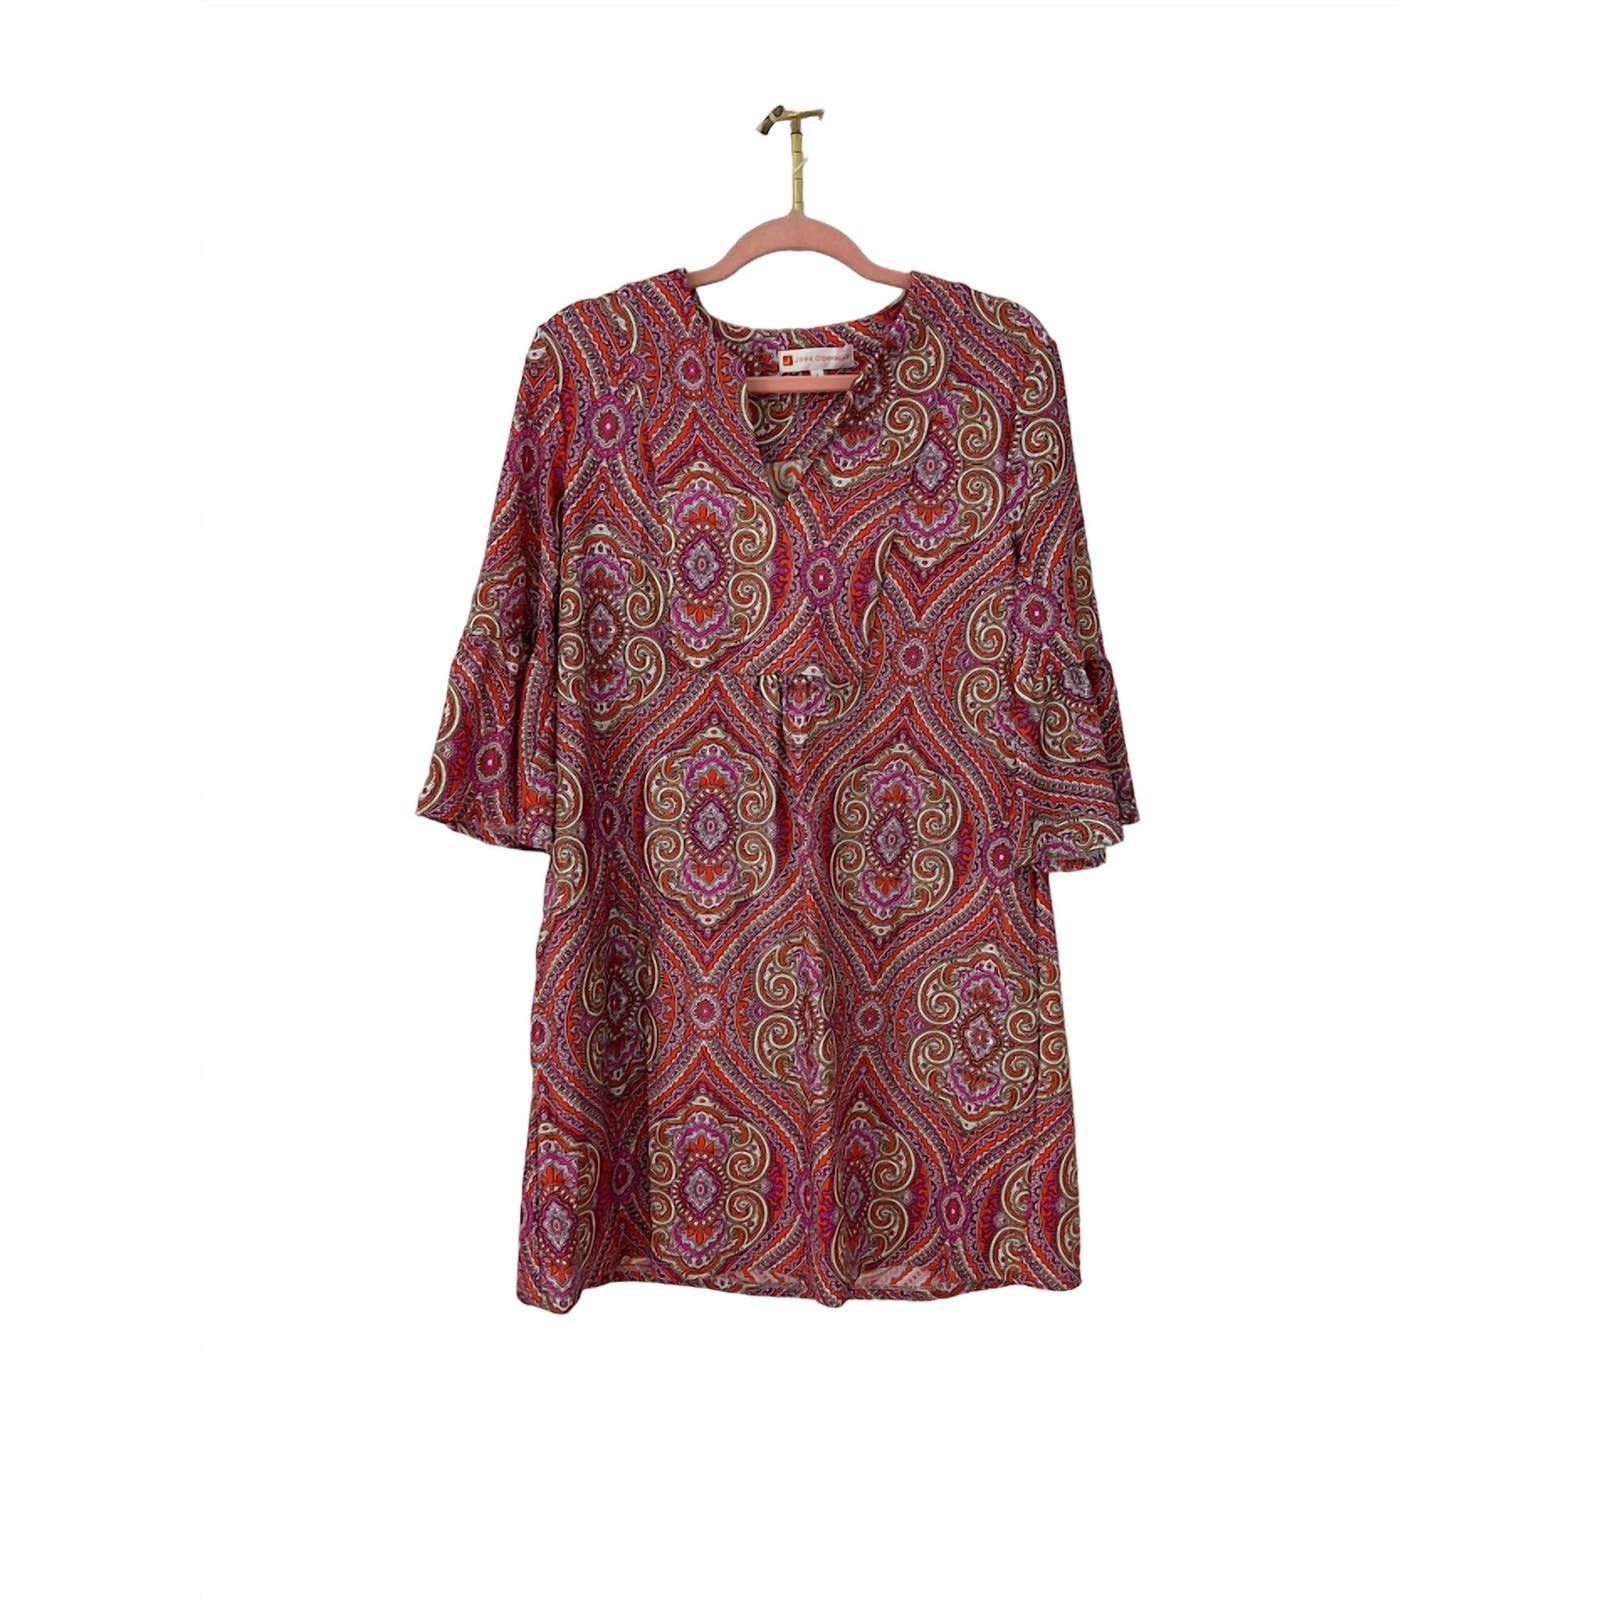 Designer JUDE CONNALLY Kerry Dress In Paisley Medallion Hot Pink | Grailed